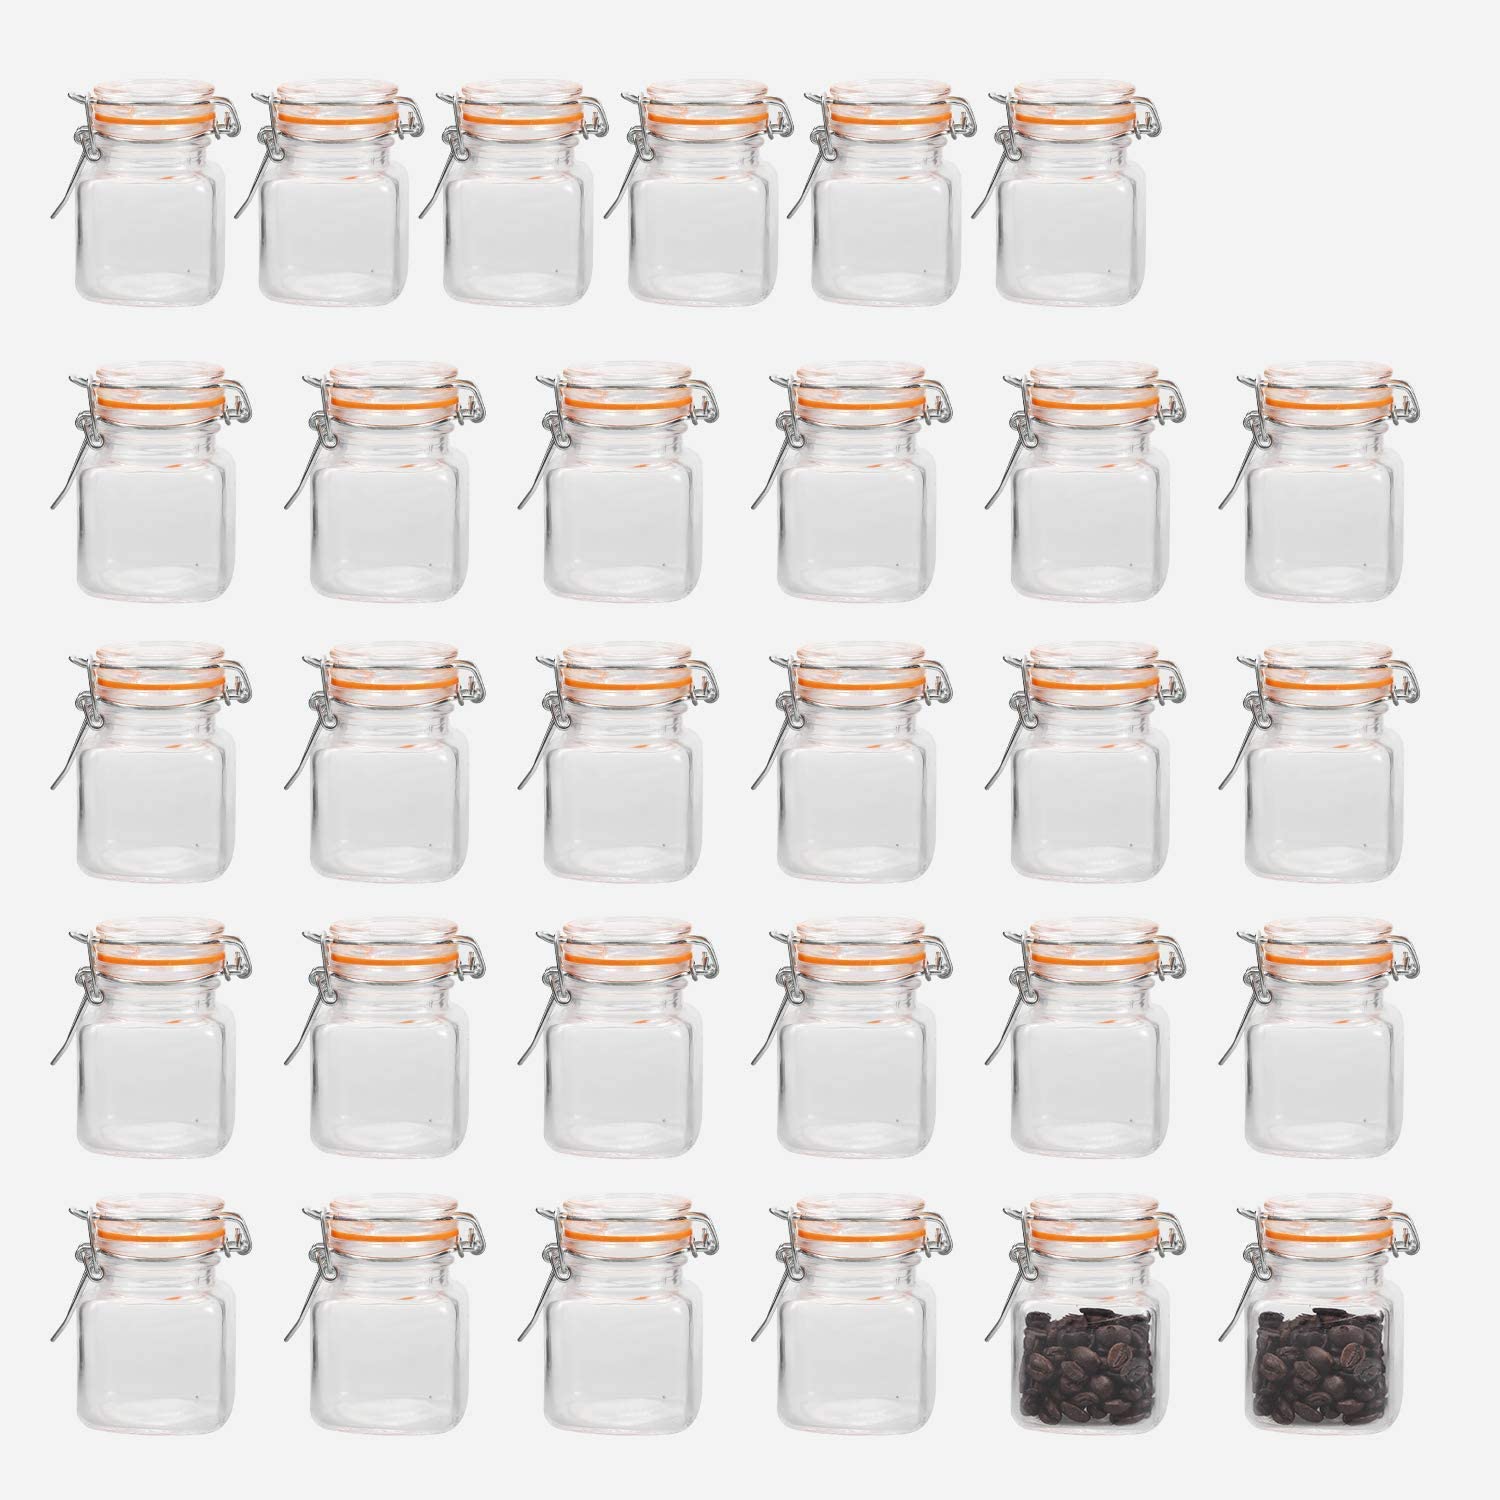 https://www.dontwasteyourmoney.com/wp-content/uploads/2023/02/encheng-hinged-airtight-lids-spice-jars-30-pack-spice-jars.jpg